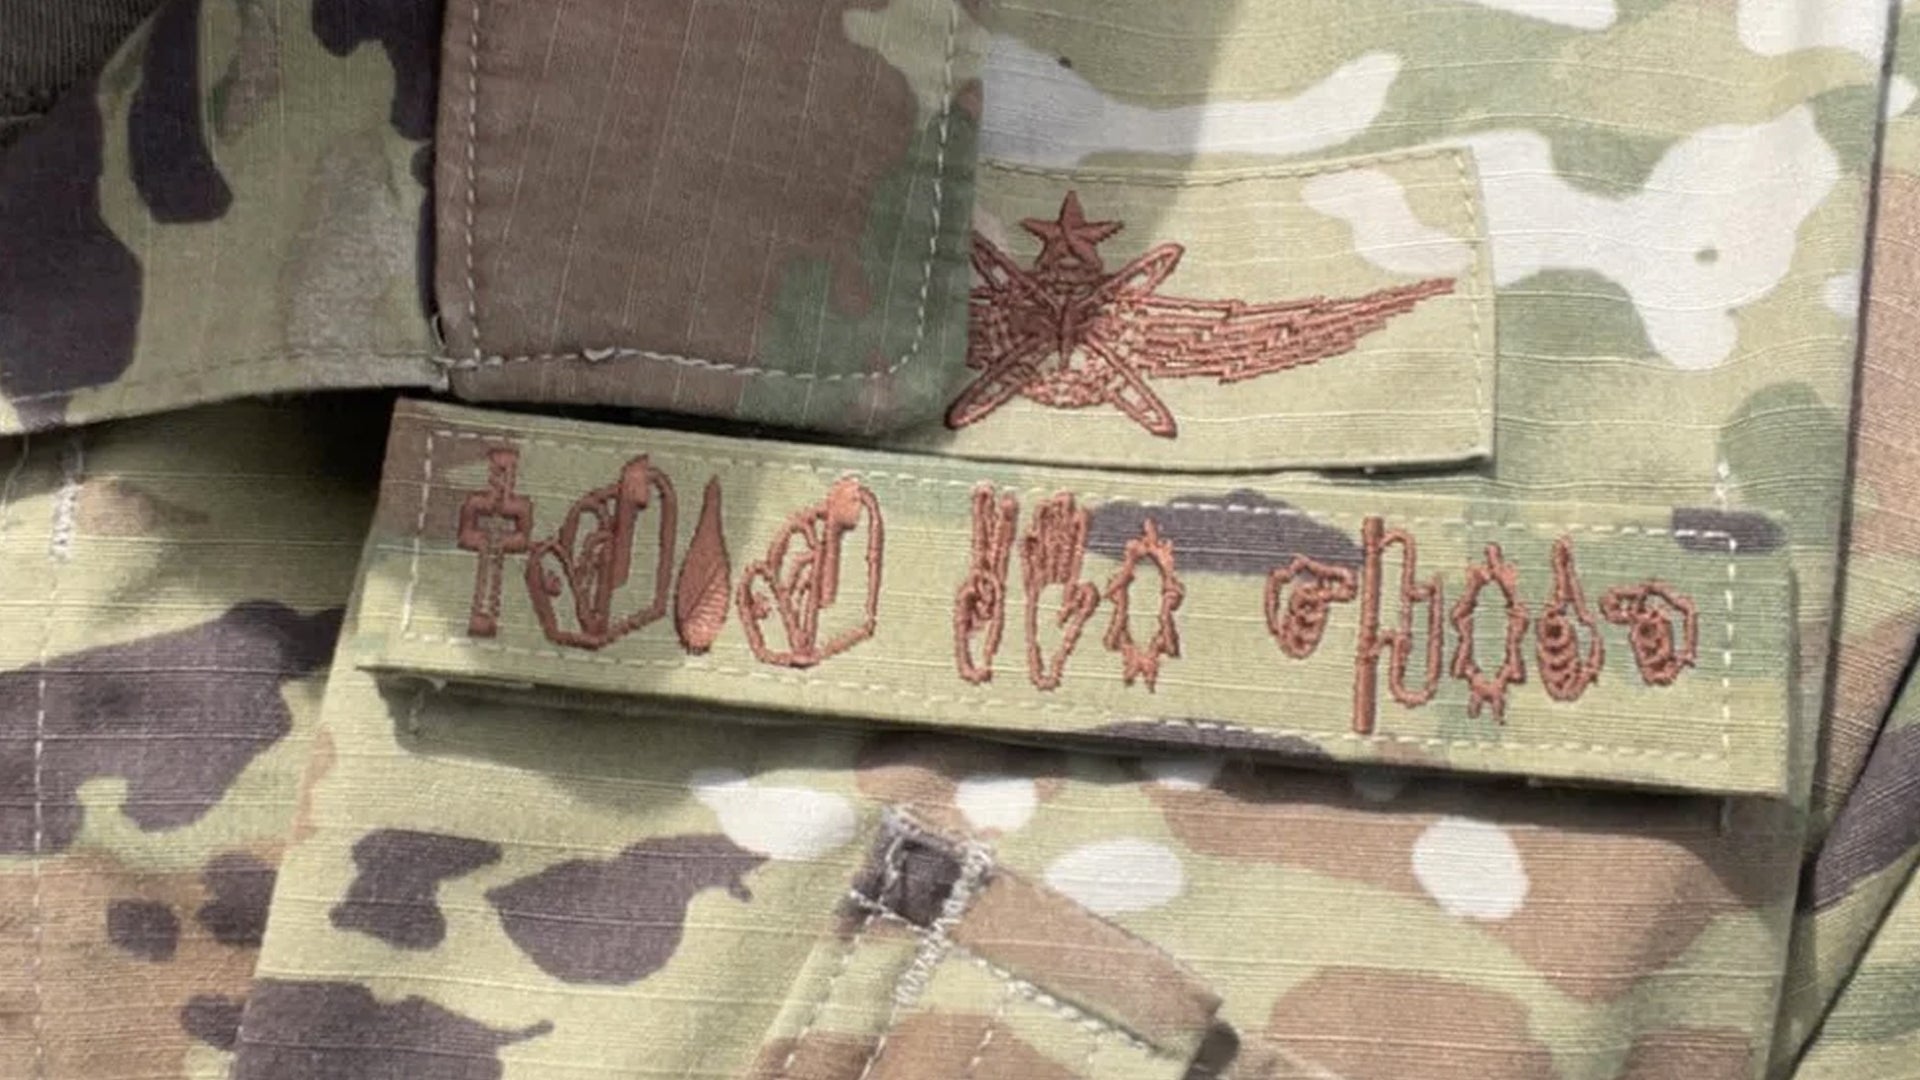 Airmen with Comic Sans name tapes are testing the limits of Air Force regulations